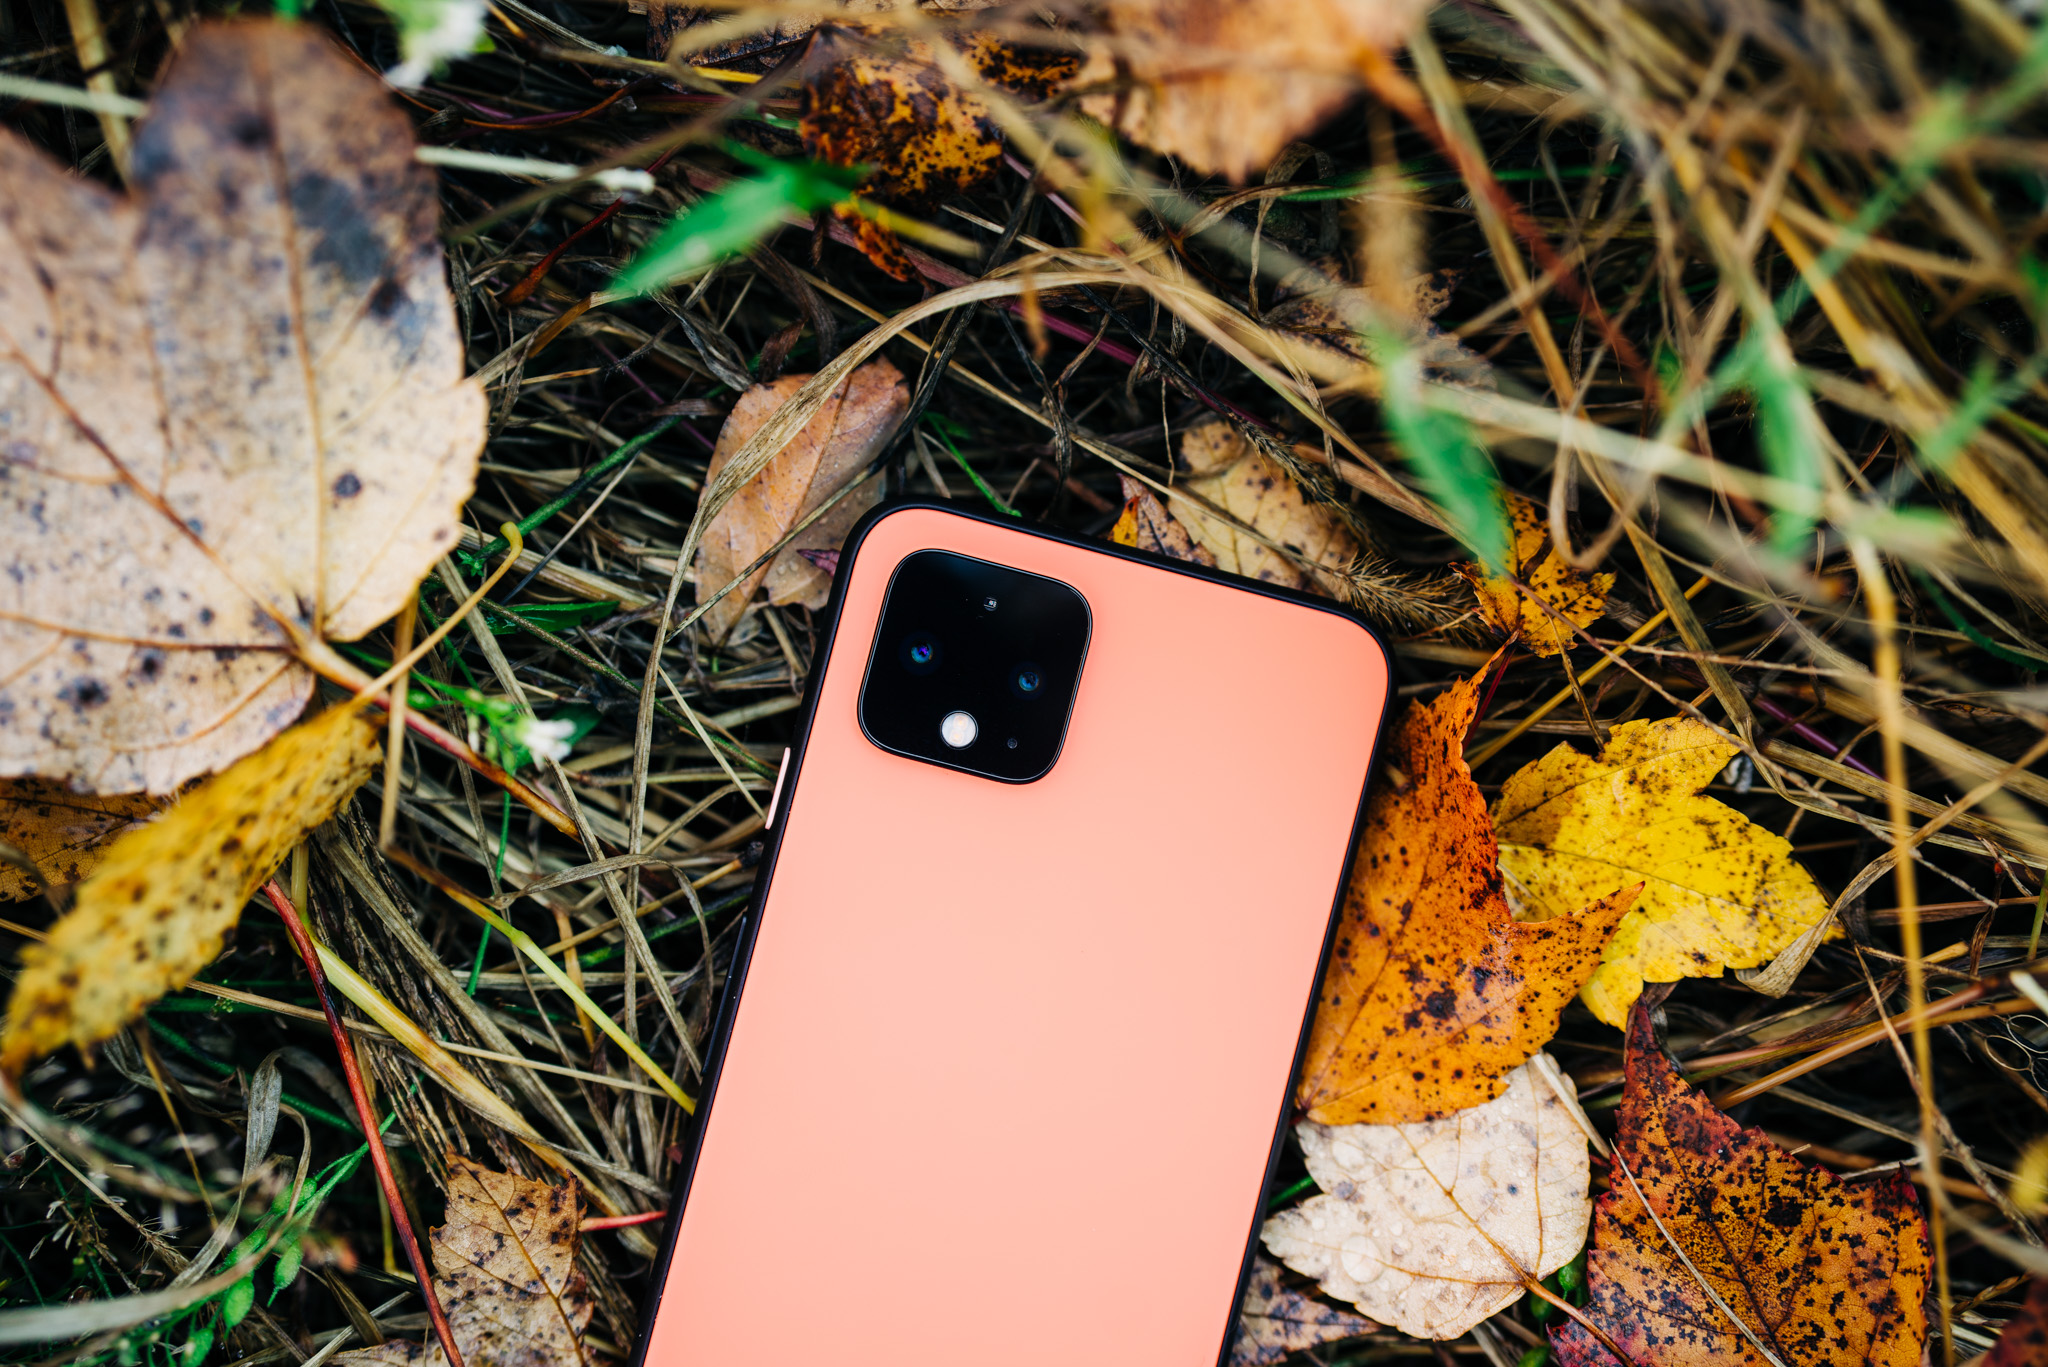 2019 was a transition period for smartphones